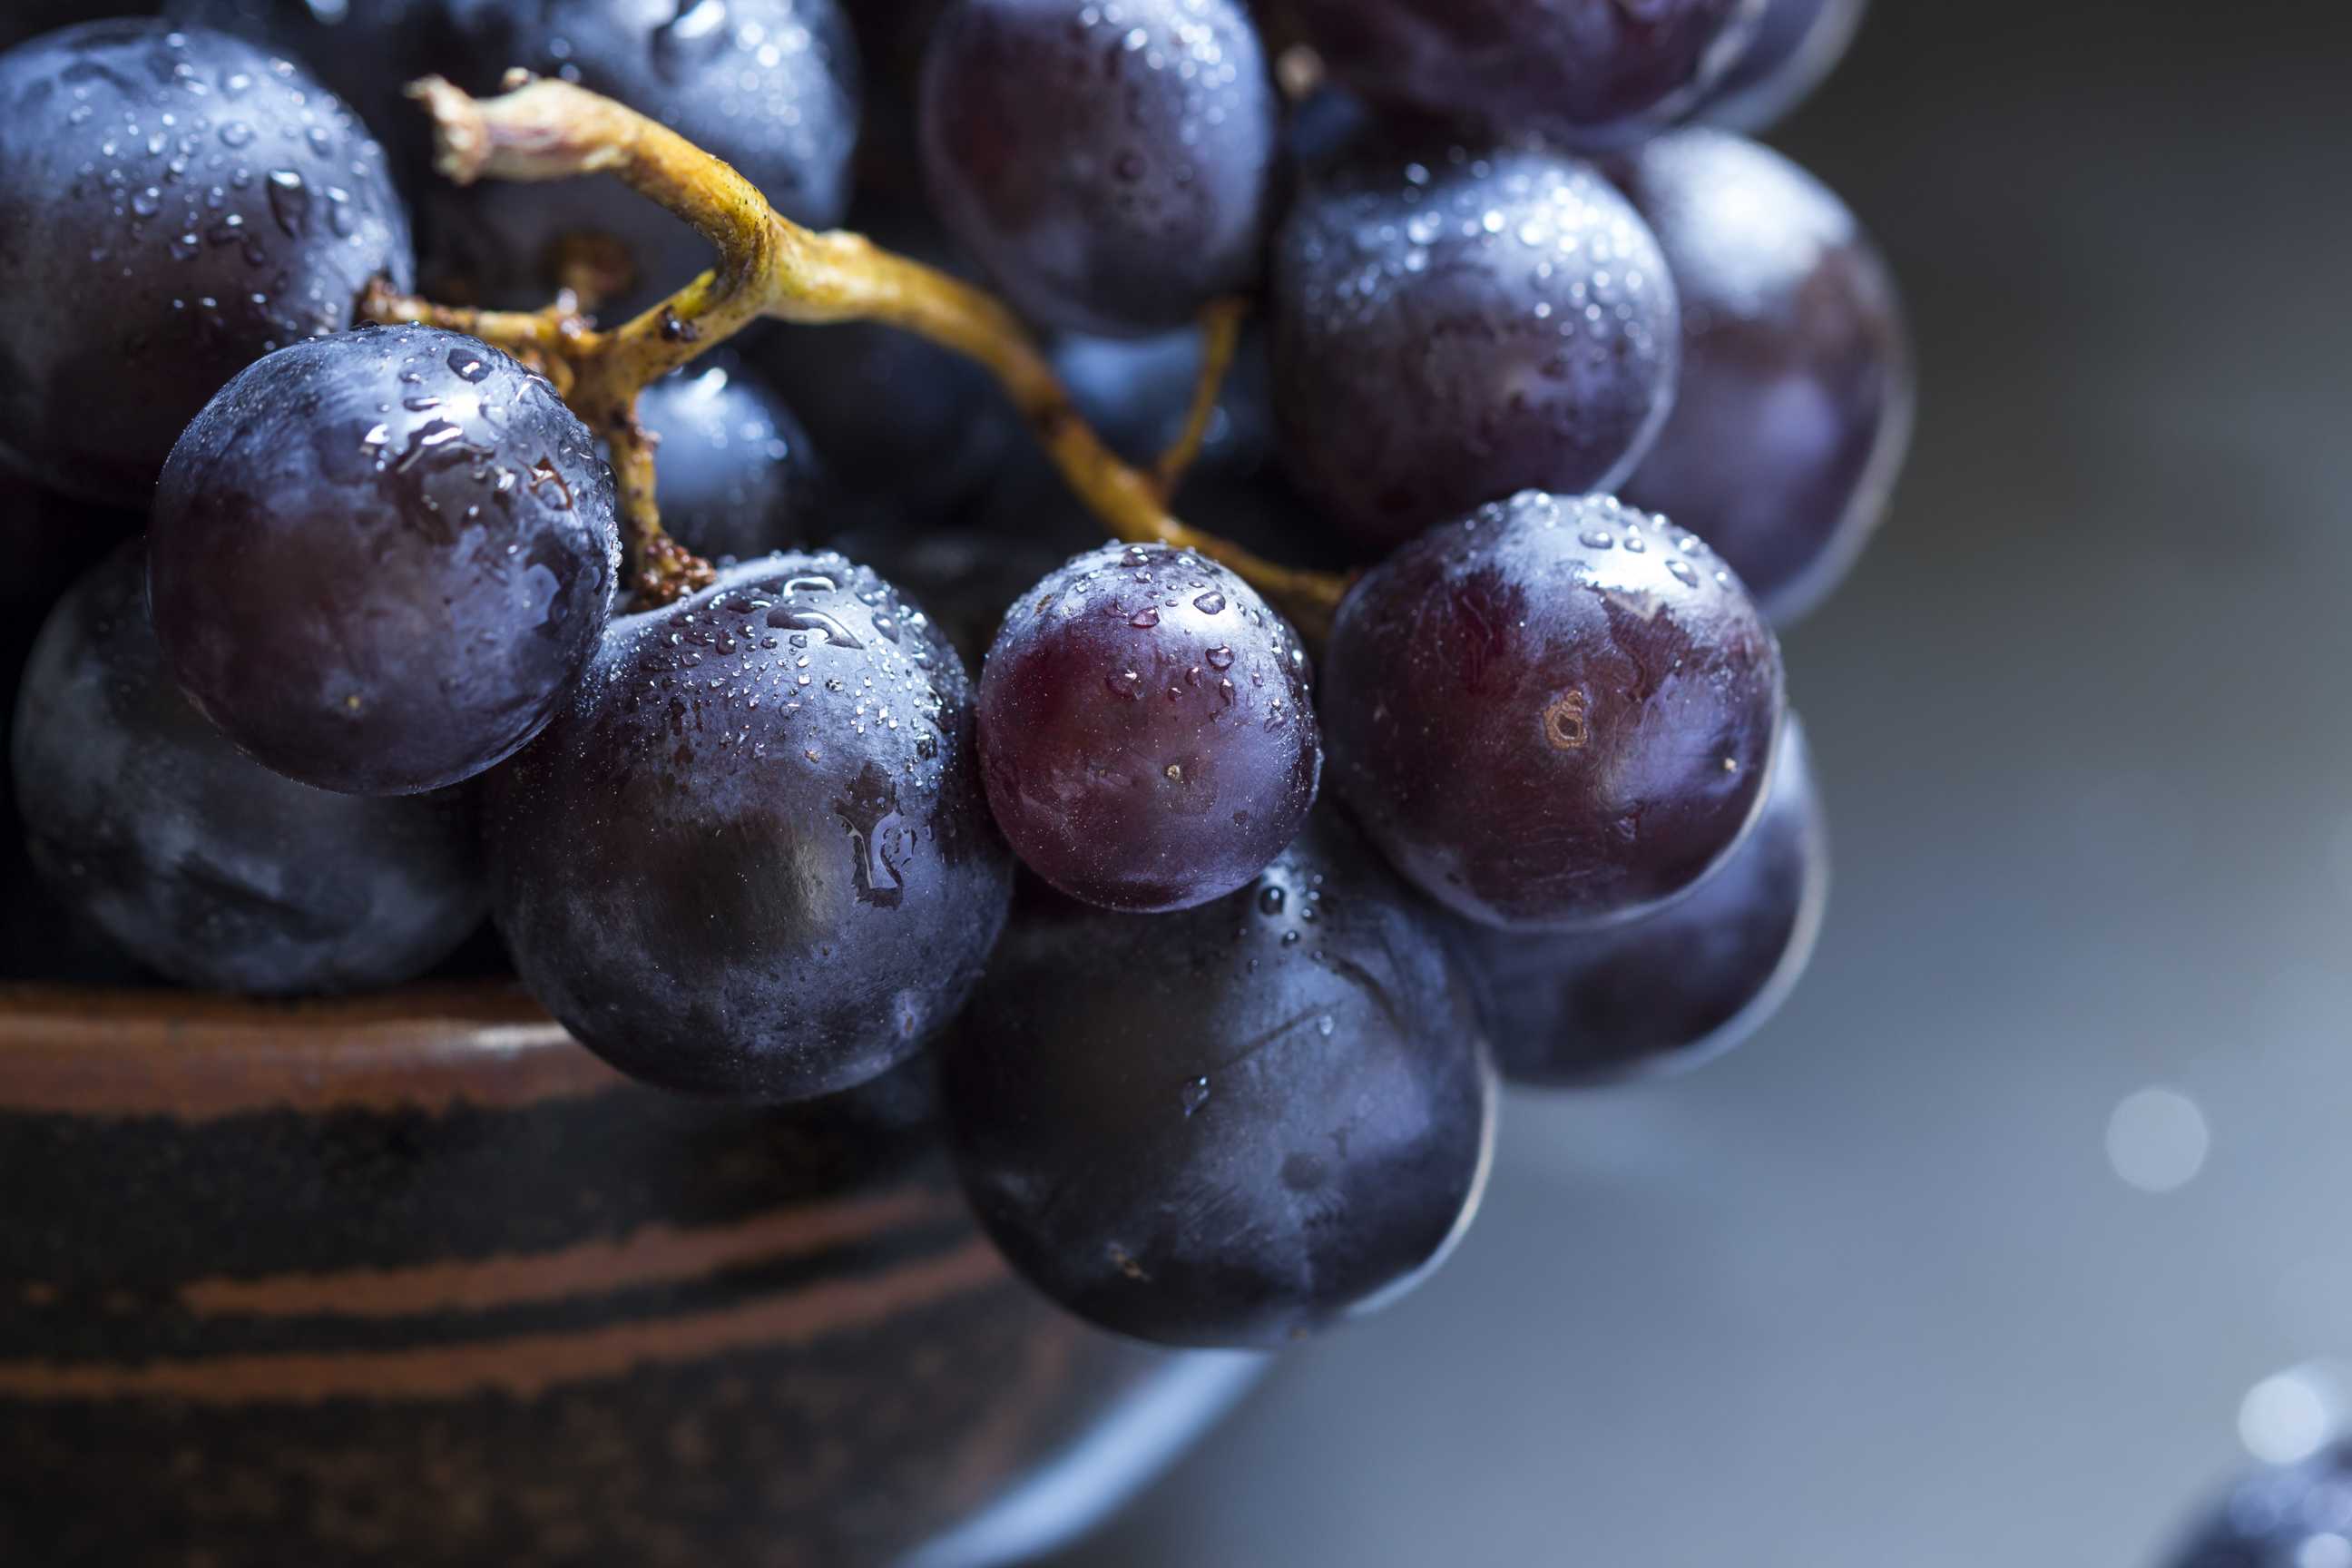 microsoft, professional faqs: are grapes good for acid reflux?